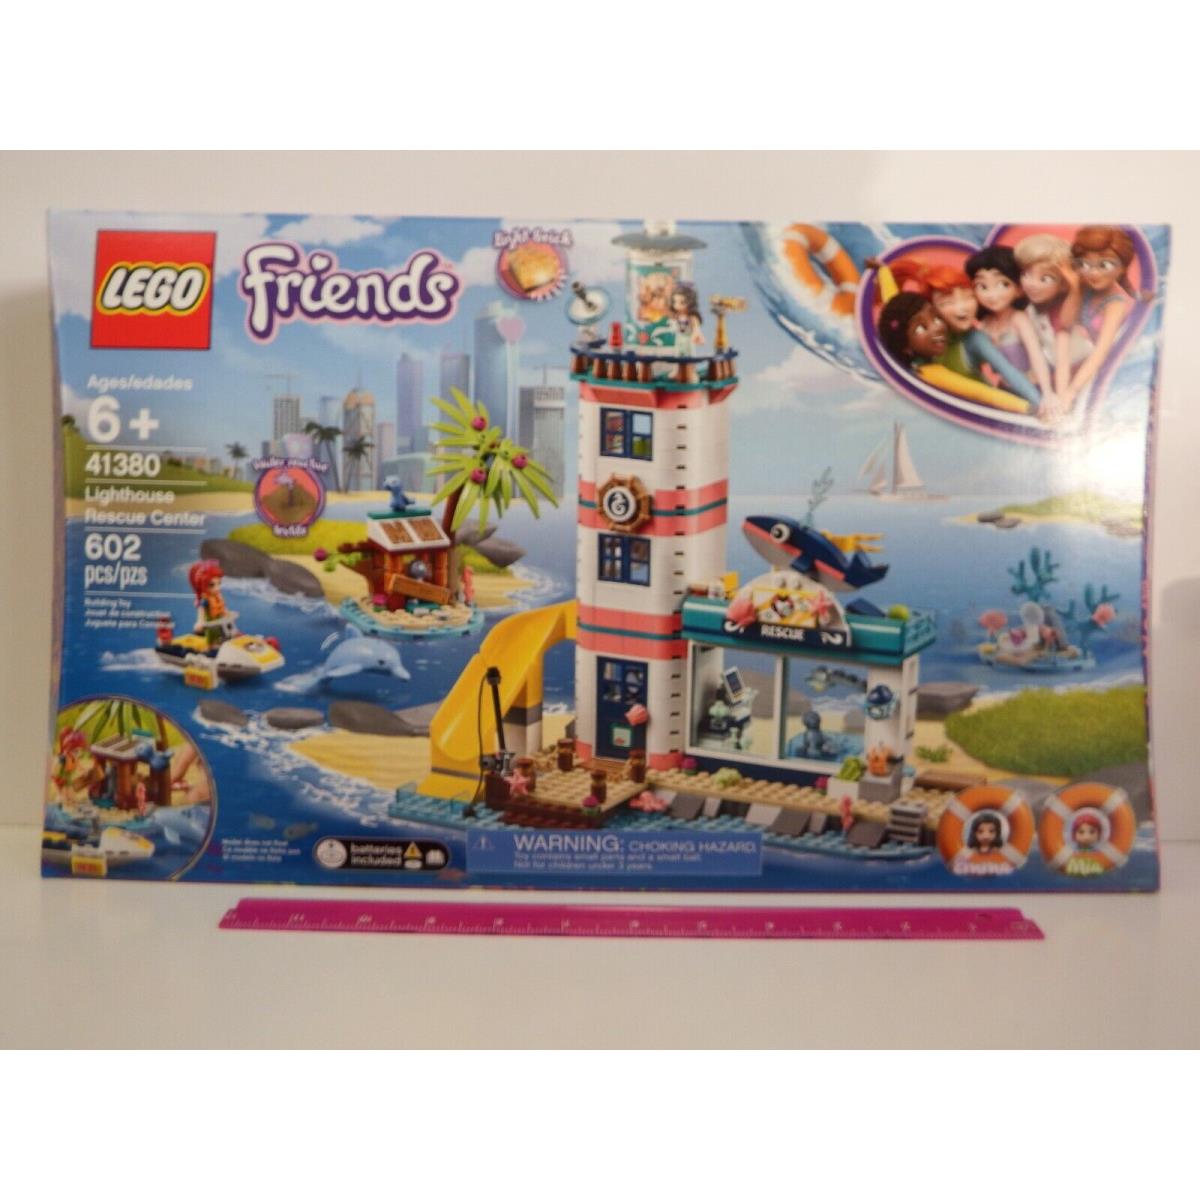 Lego - Friends 41380 Lighthouse Rescue Center - 602 Pieces - Ages 6 - 12 Years